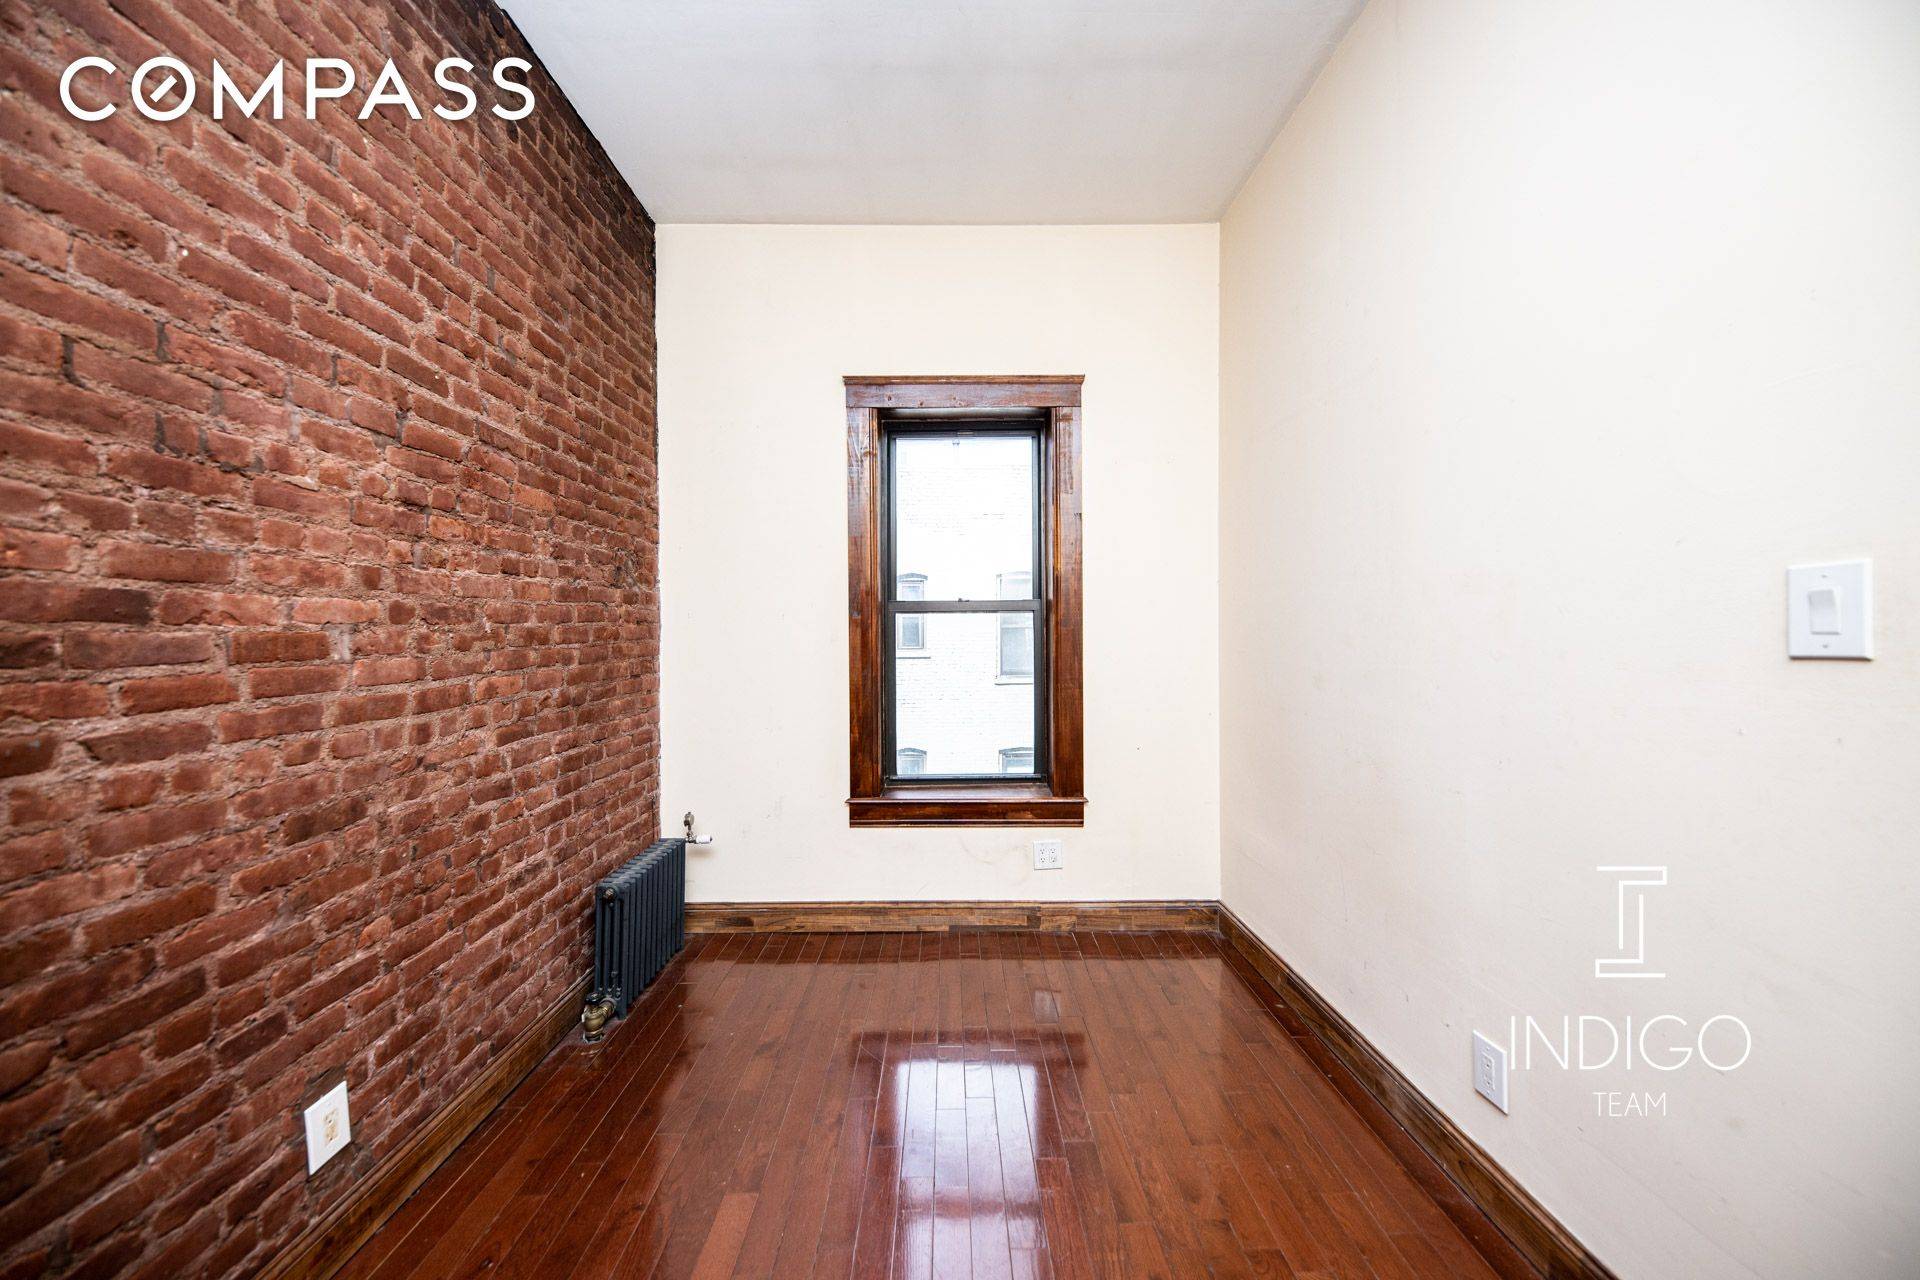 4 bed 2 bath apartment in prime Crown Heights Brooklyn Come see this pre war four bed with heat and hot water included.